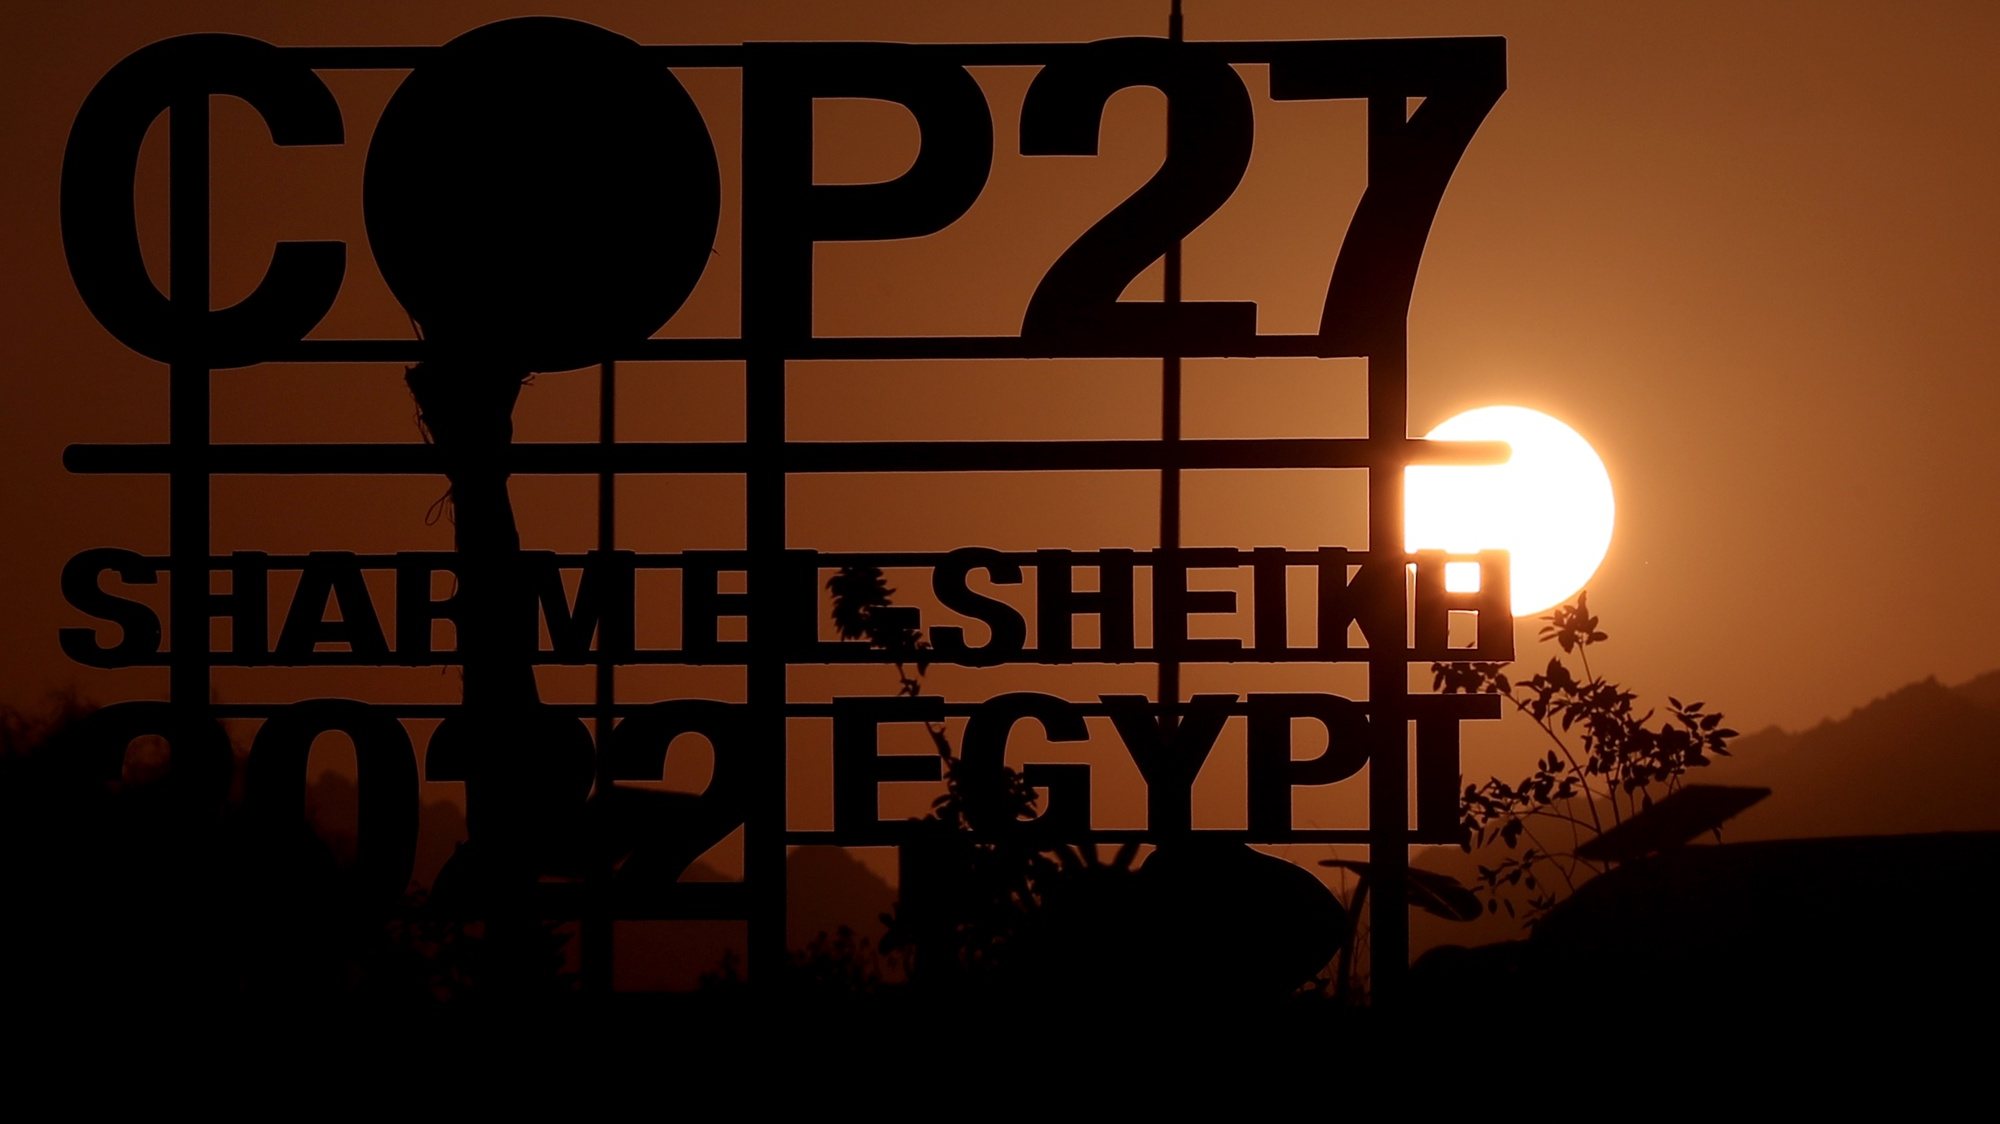 epa10286229 The sun sets behind the International Congress Center before the 2022 United Nations Climate Change Conference (COP27),  in Sharm El-Sheikh, in Egypt, 04 November 2022. The 2022 United Nations Climate Change Conference (COP27), running from 06 till 18 November in Sharm El-Sheikh, is expected to host one of the largest number of participants in the annual global climate conference of over 40,000 estimated attendees including heads of states and governments, civil society, media and other relevant stakeholders. The events will include Climate Implementation Summit, thematic days, flagship initiatives, and Green Zone activities engaging with climate and other global challenges.  EPA/SEDAT SUNA